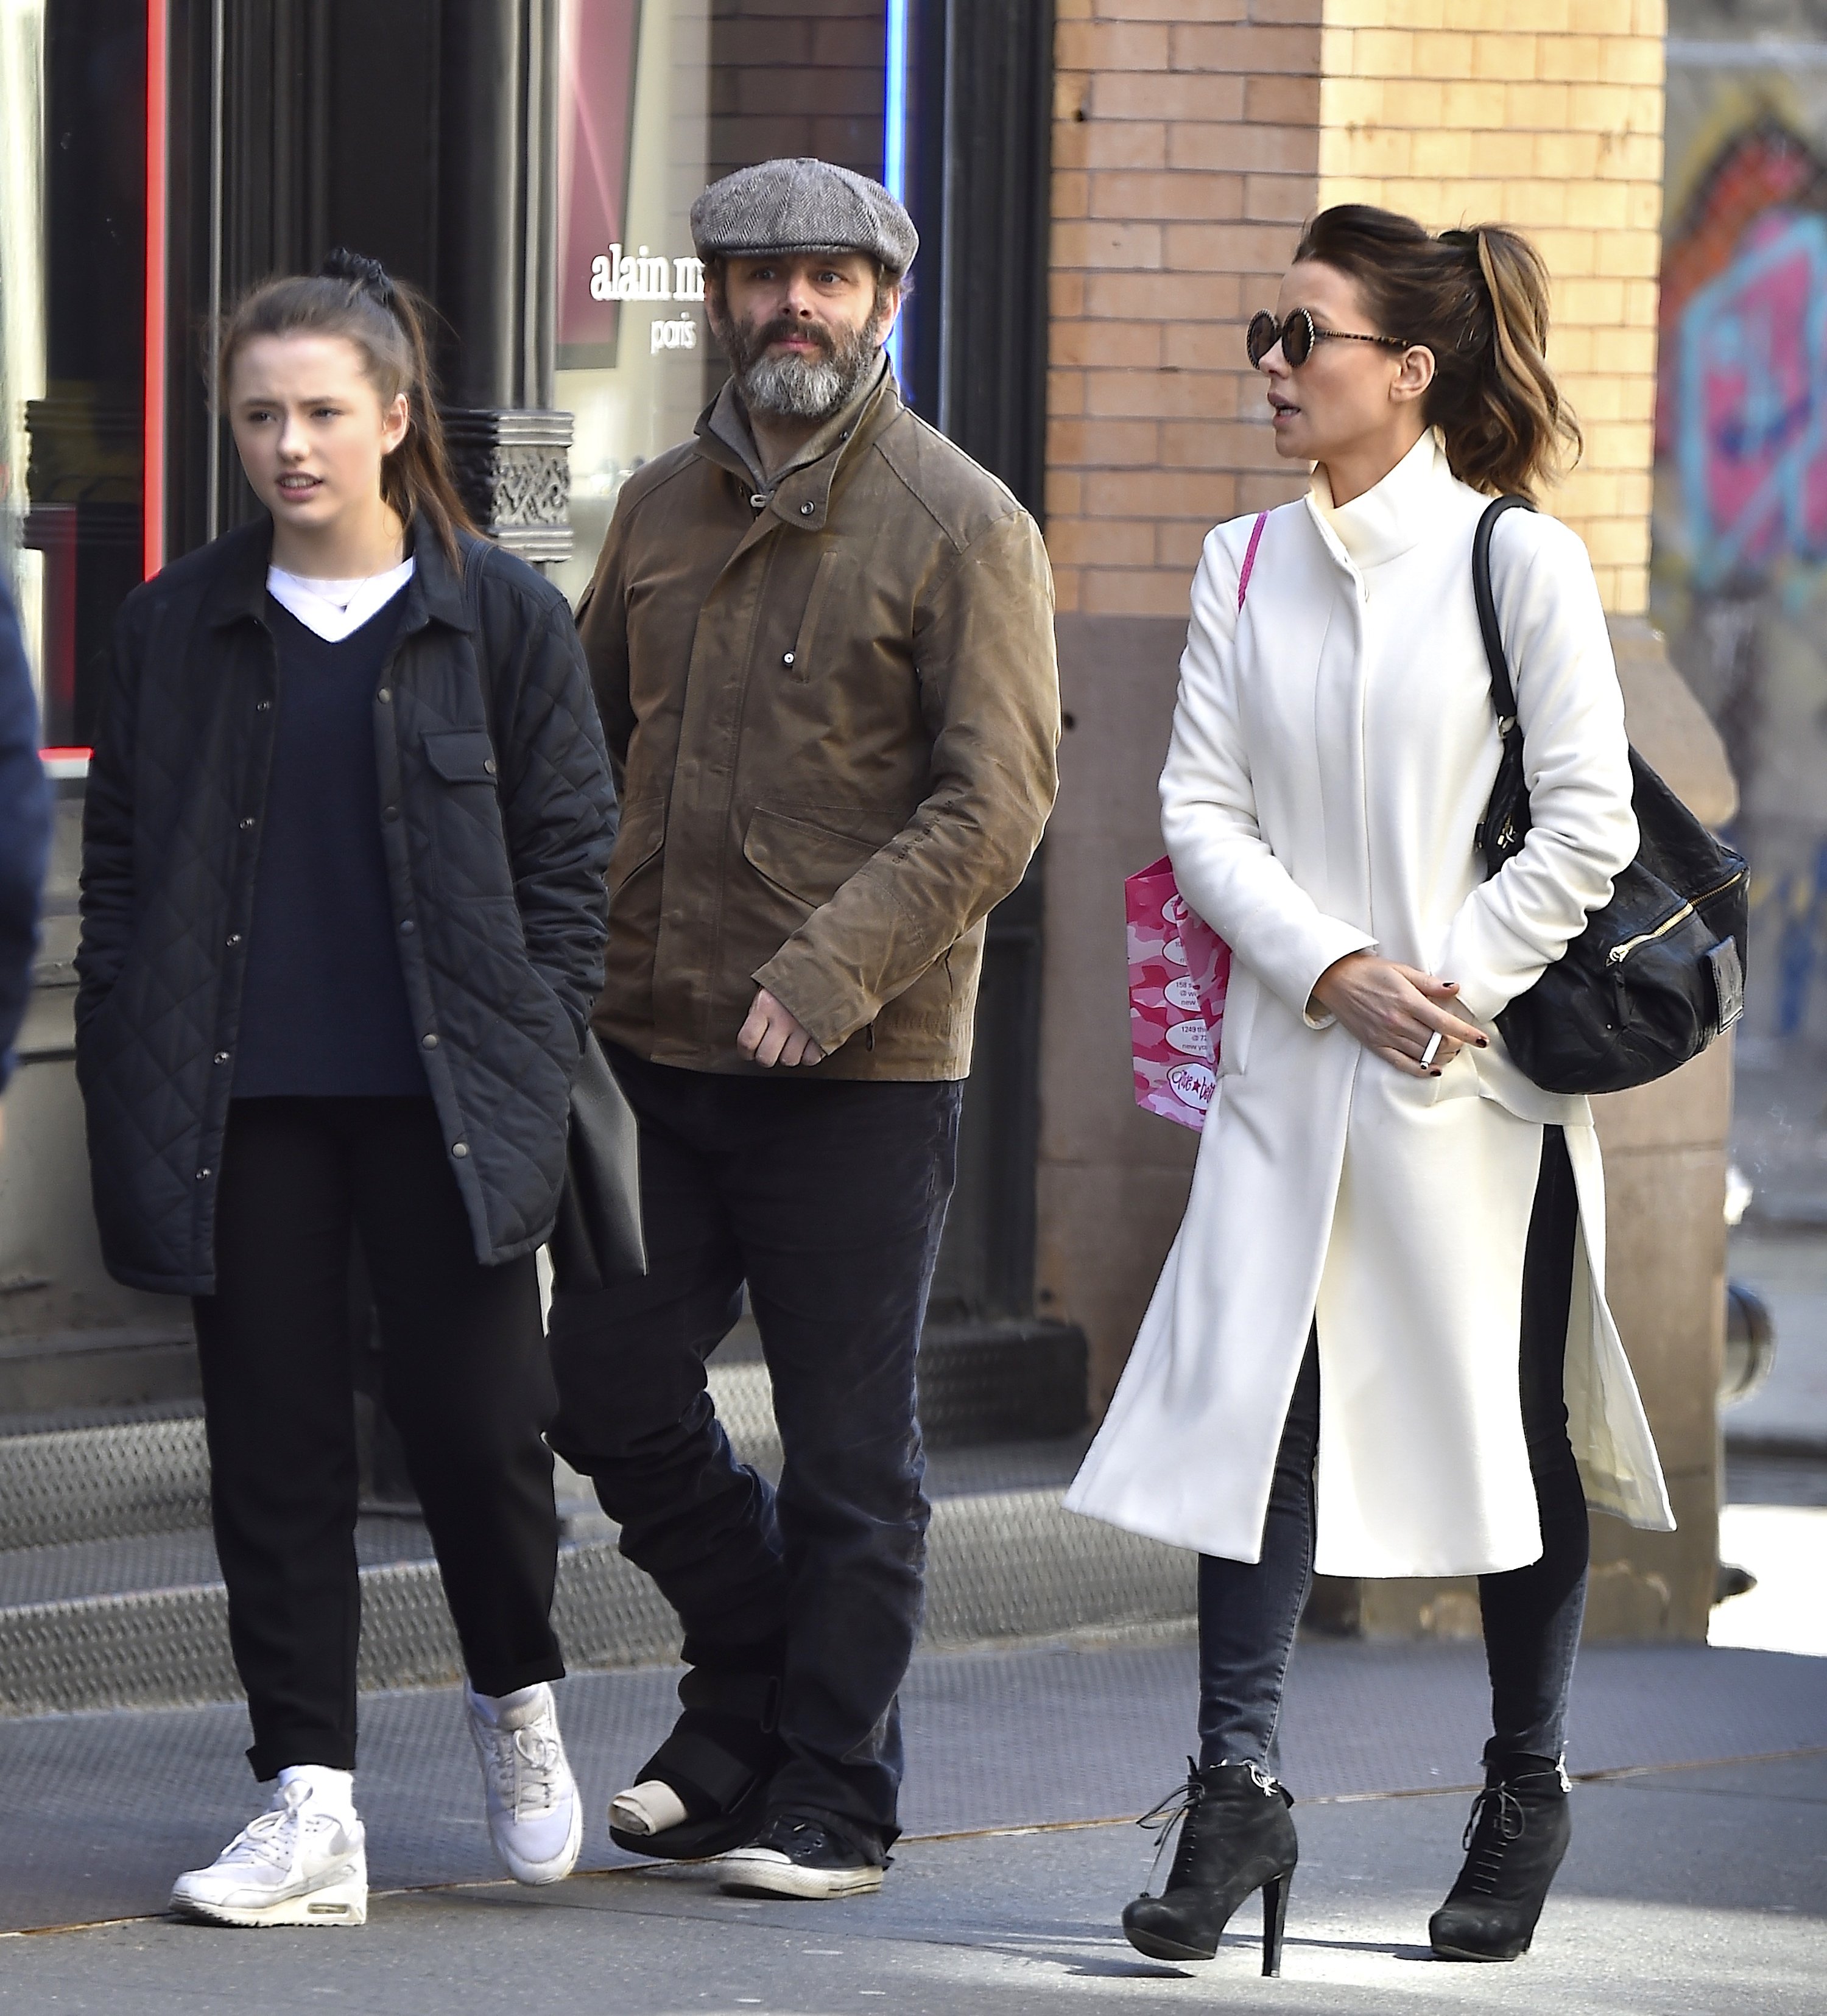 Kate Beckinsale, Lily Mo Sheen and Michael Sheen out and about in Soho on April 5, 2016 in New York City.  |  Source: Getty Images